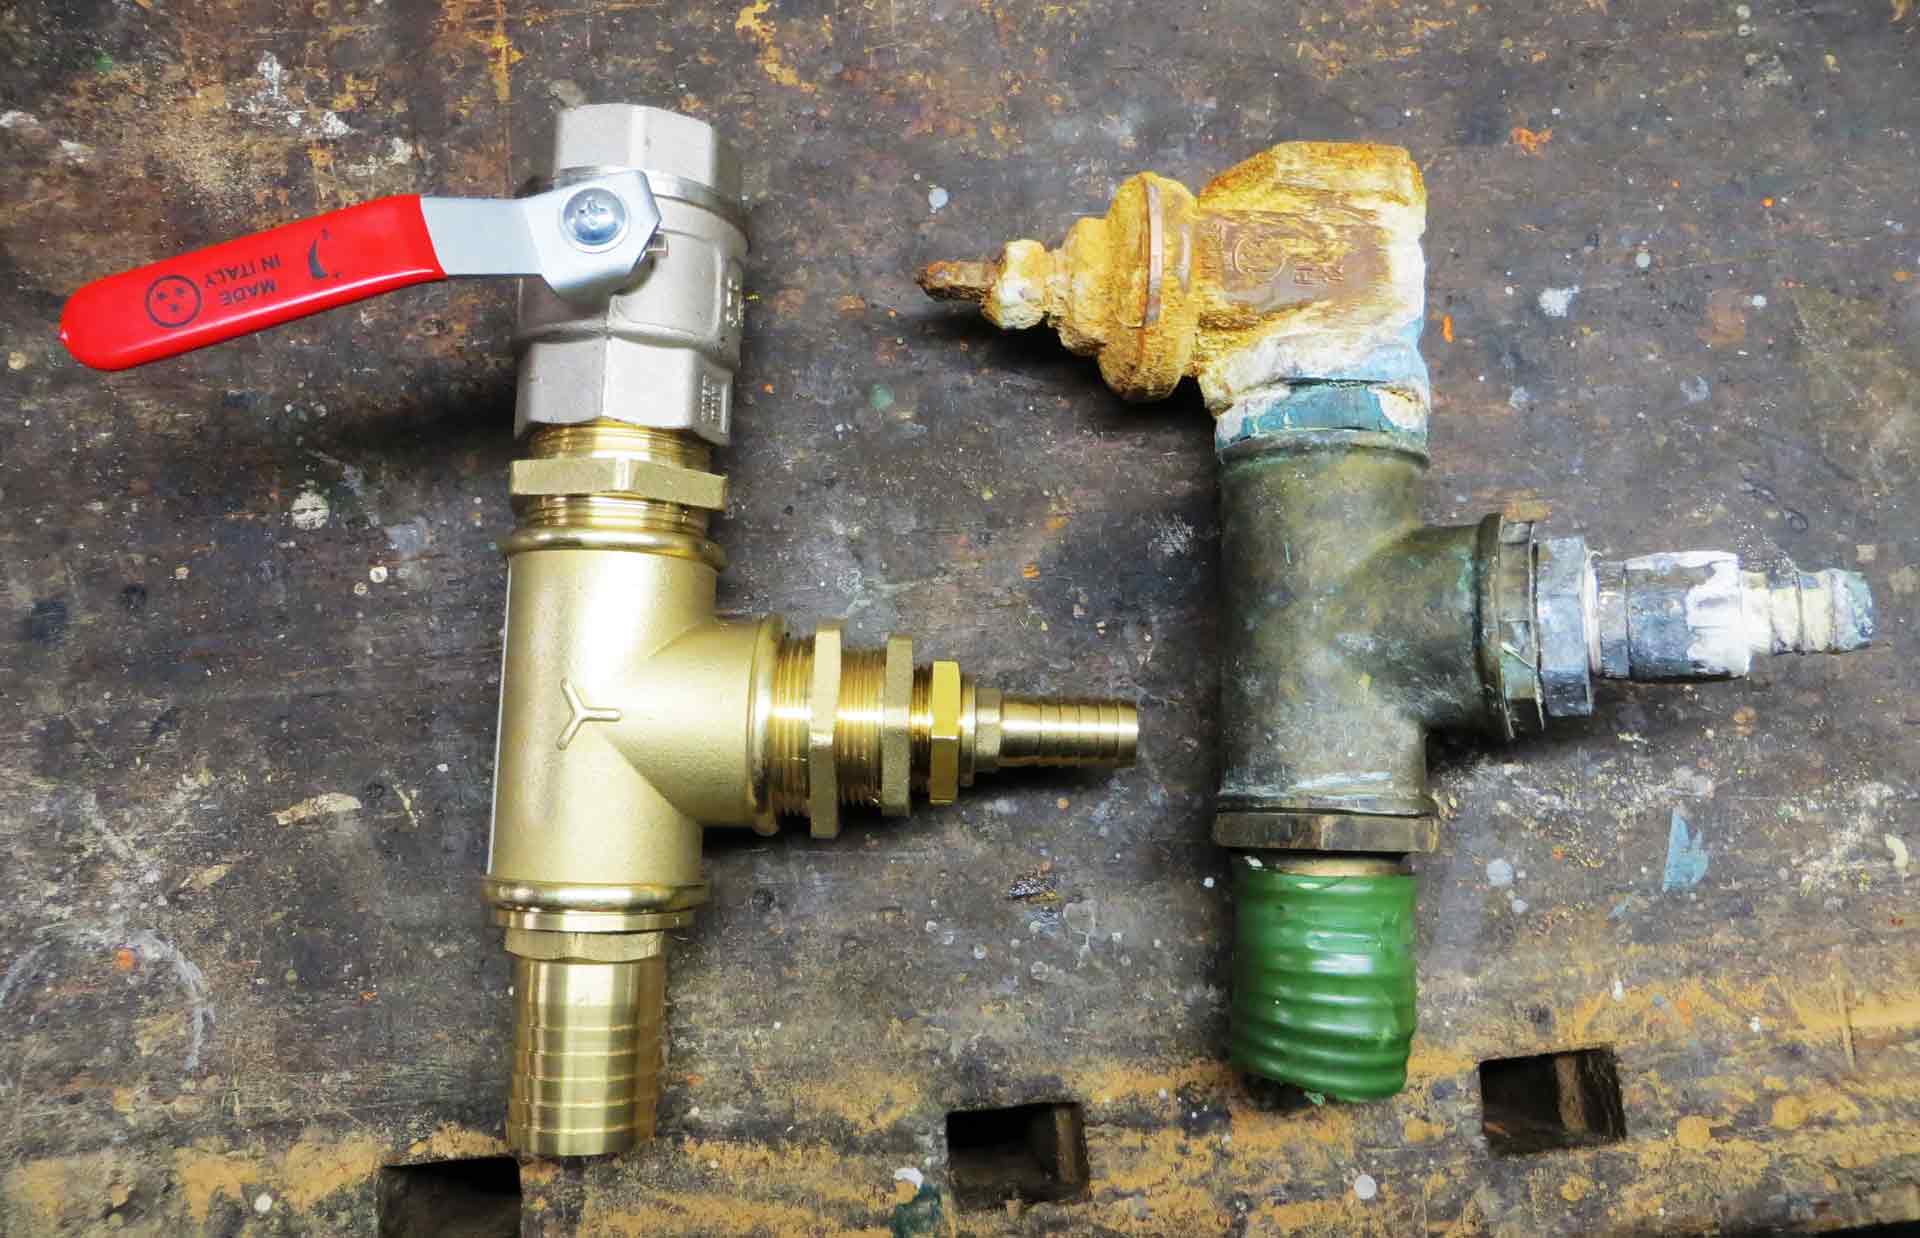 Old valves have been substituted